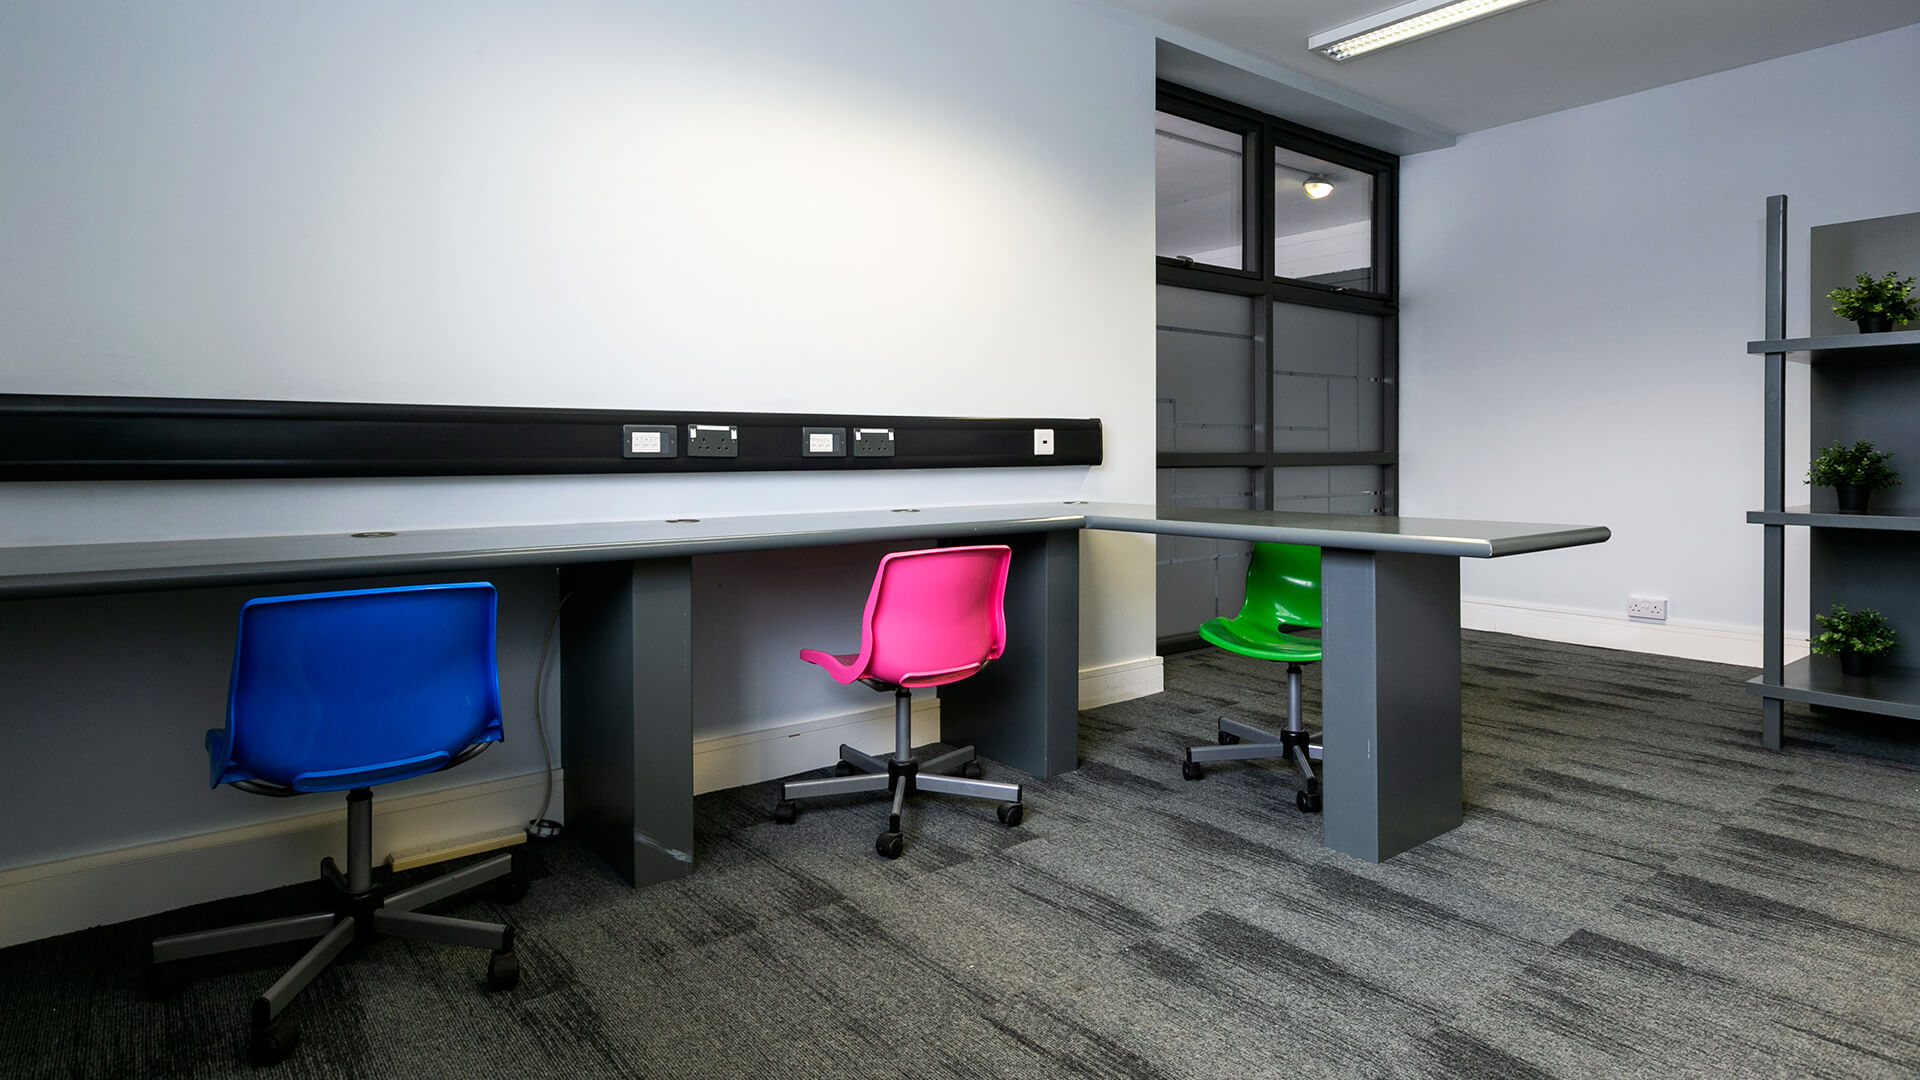 Bright pink, blue and green chairs sit in the iD8 office space